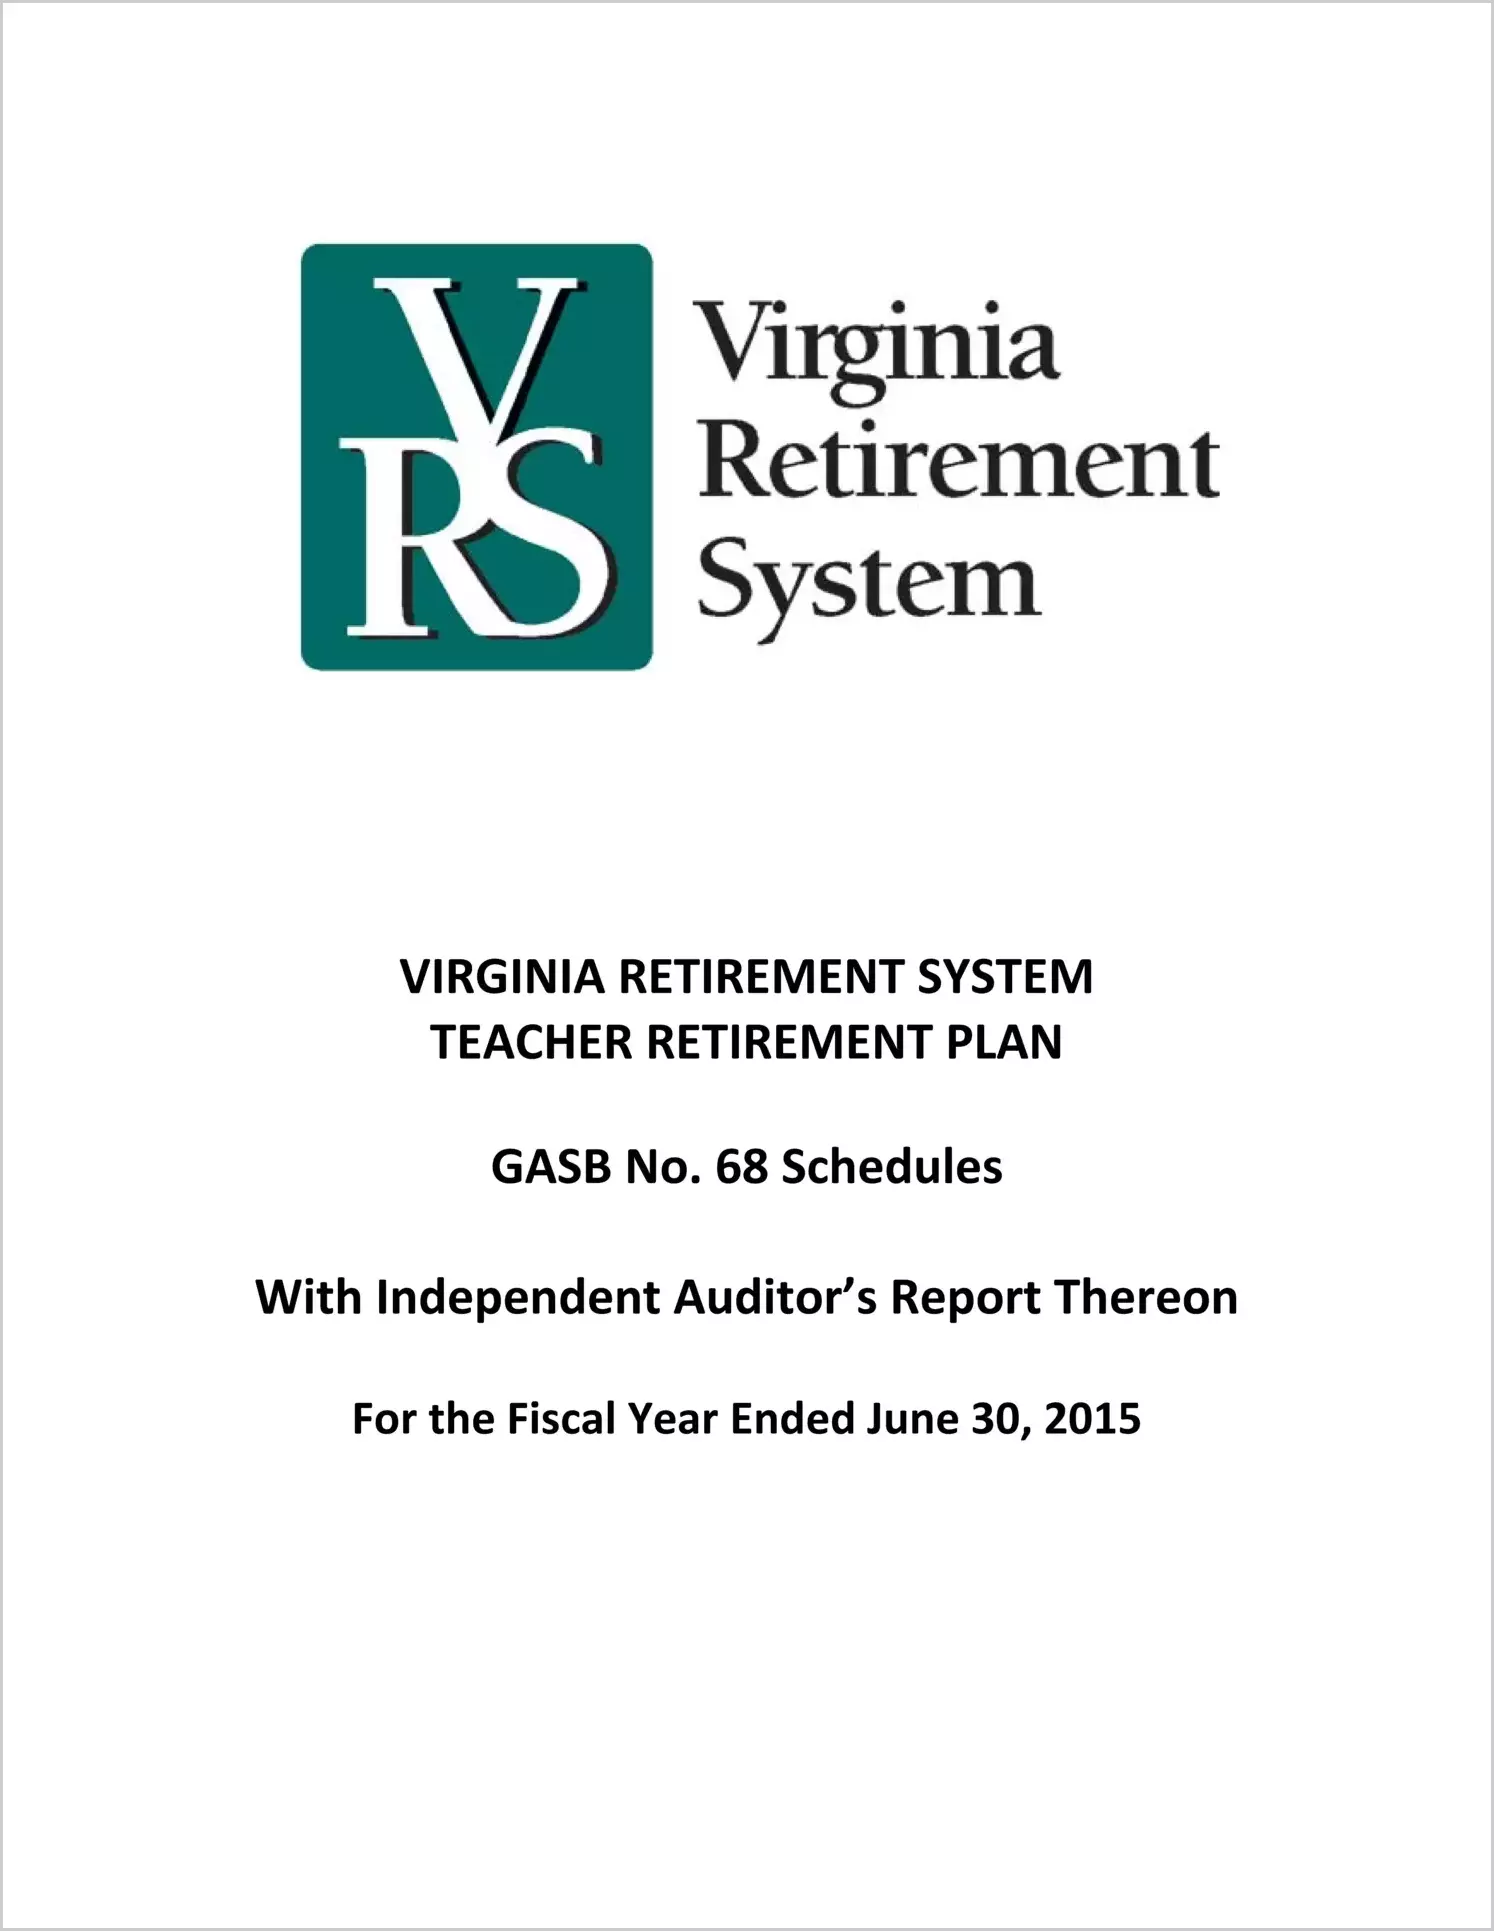 GASB 68 Schedule - Teacher Retirement Plan for the year ended June 30, 2015